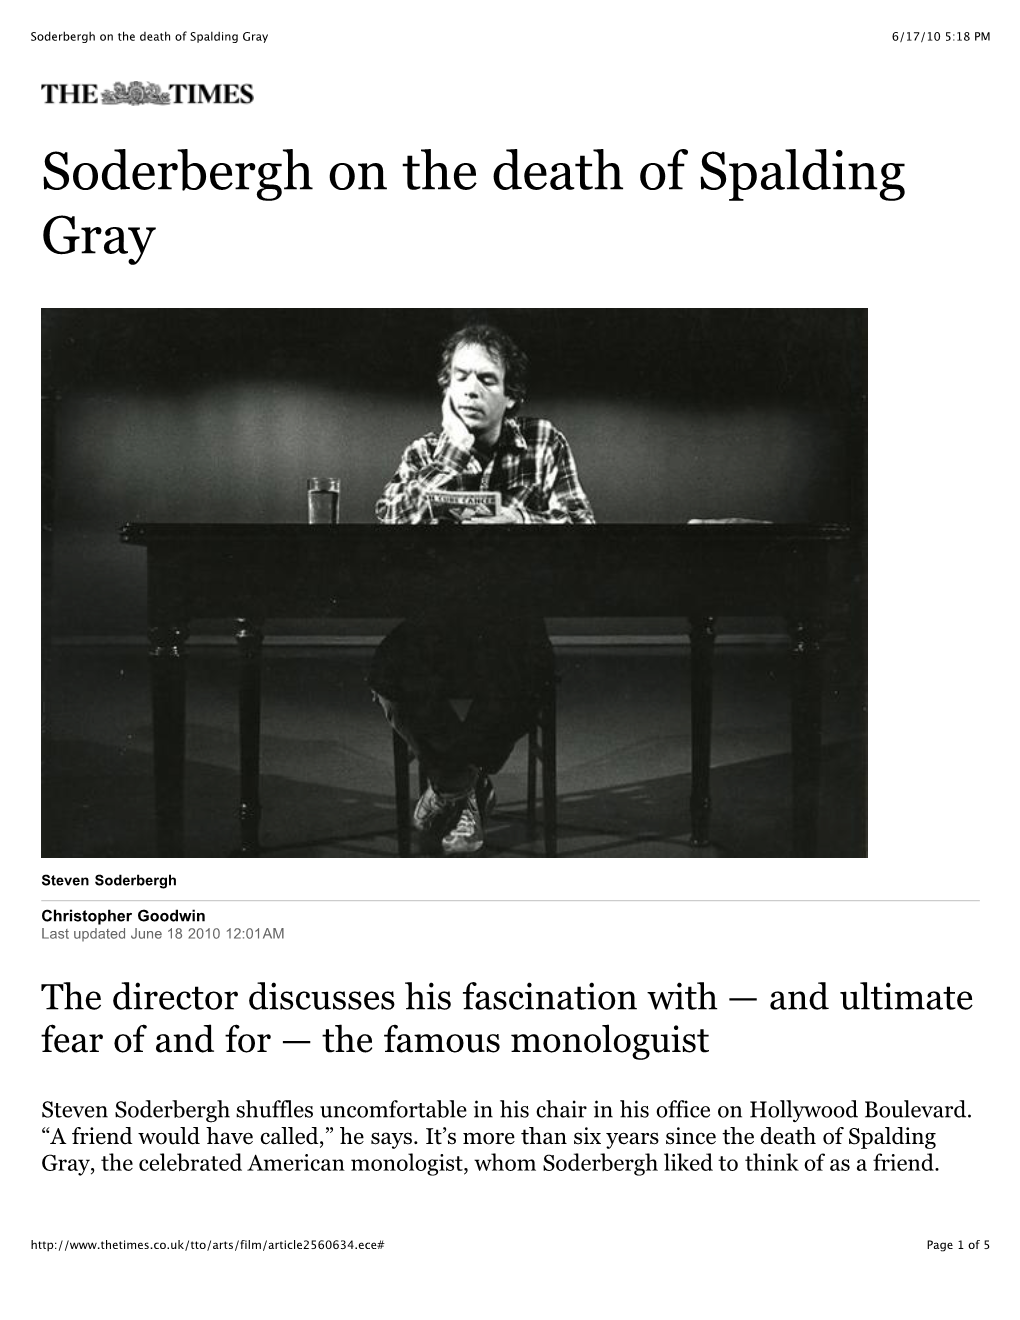 Soderbergh on the Death of Spalding Gray 6/17/10 5:18 PM